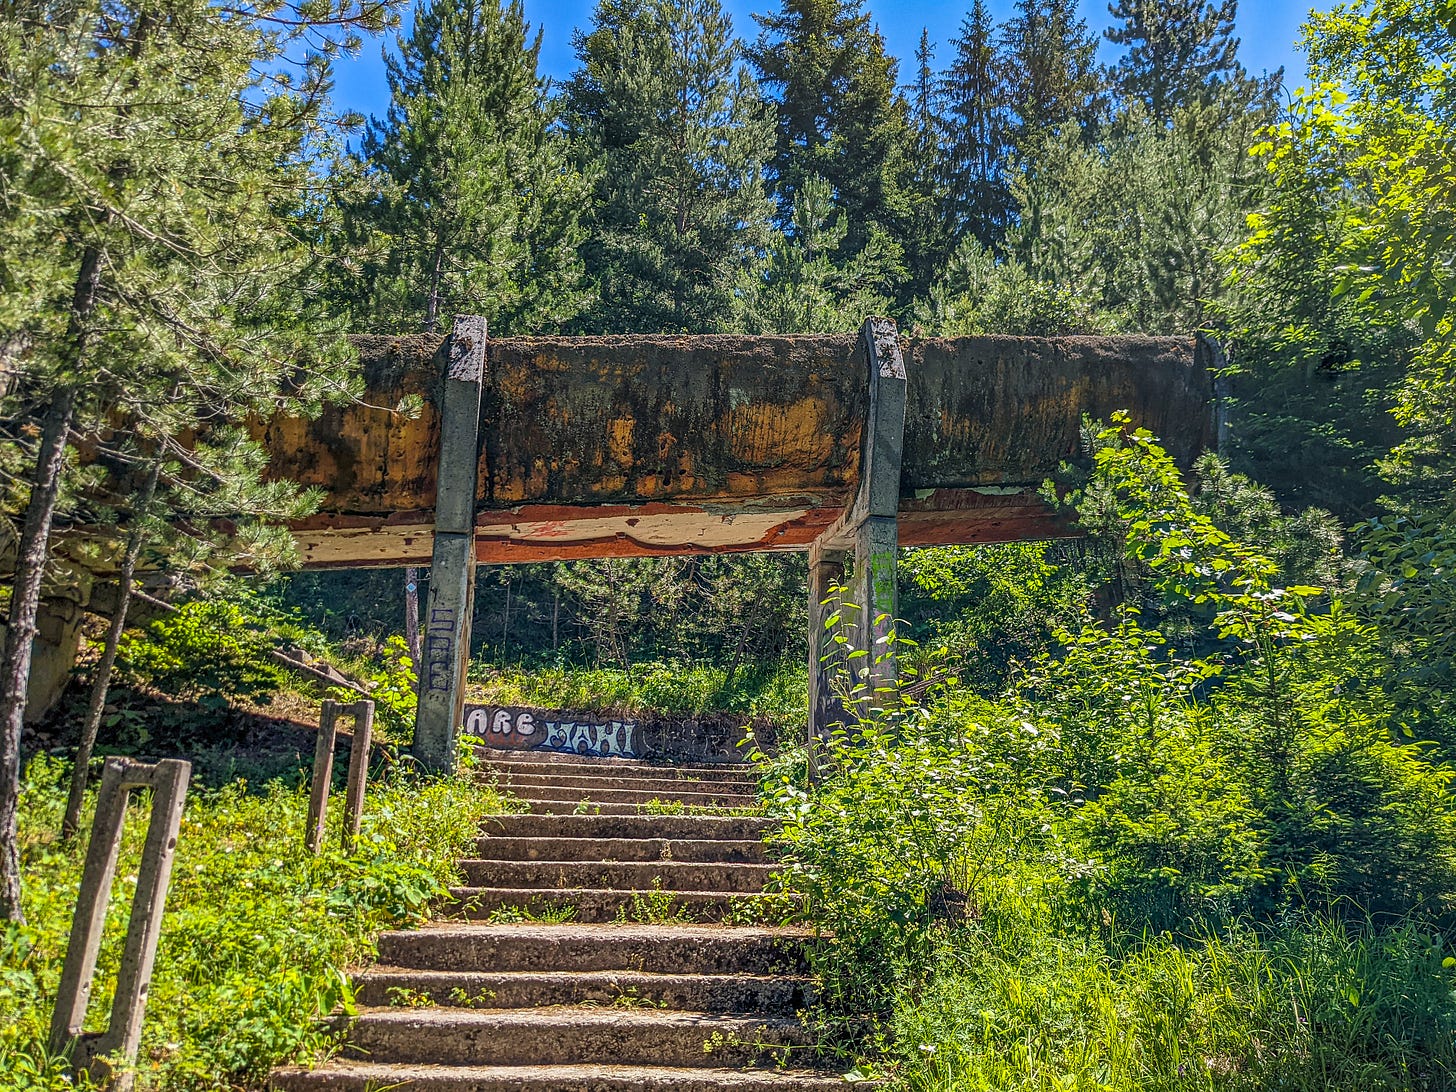 A ruined portion of the Olympic bobsleigh run in front of a backdrop of trees. The concrete run supported by two pillars is stained black and orange. 